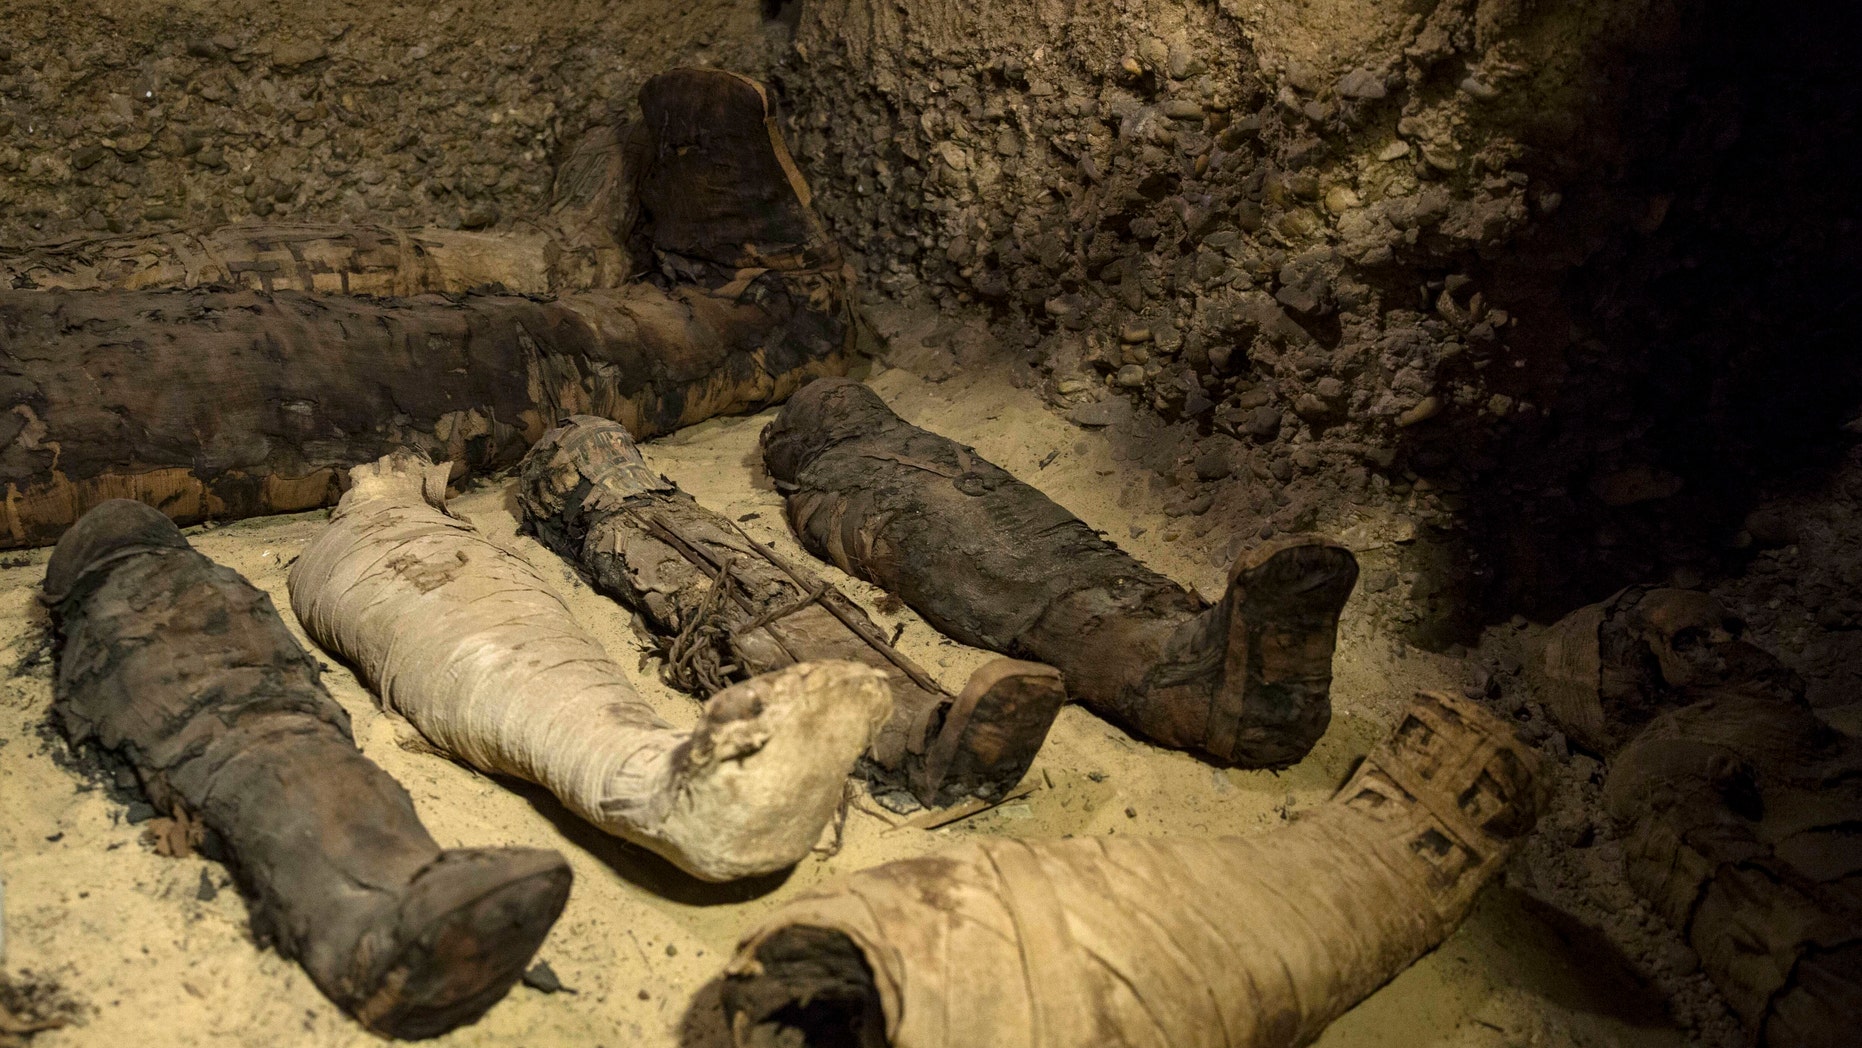 Amazing mummies discovery: Remains of dozens of people, including children, found in Egyptian tombs